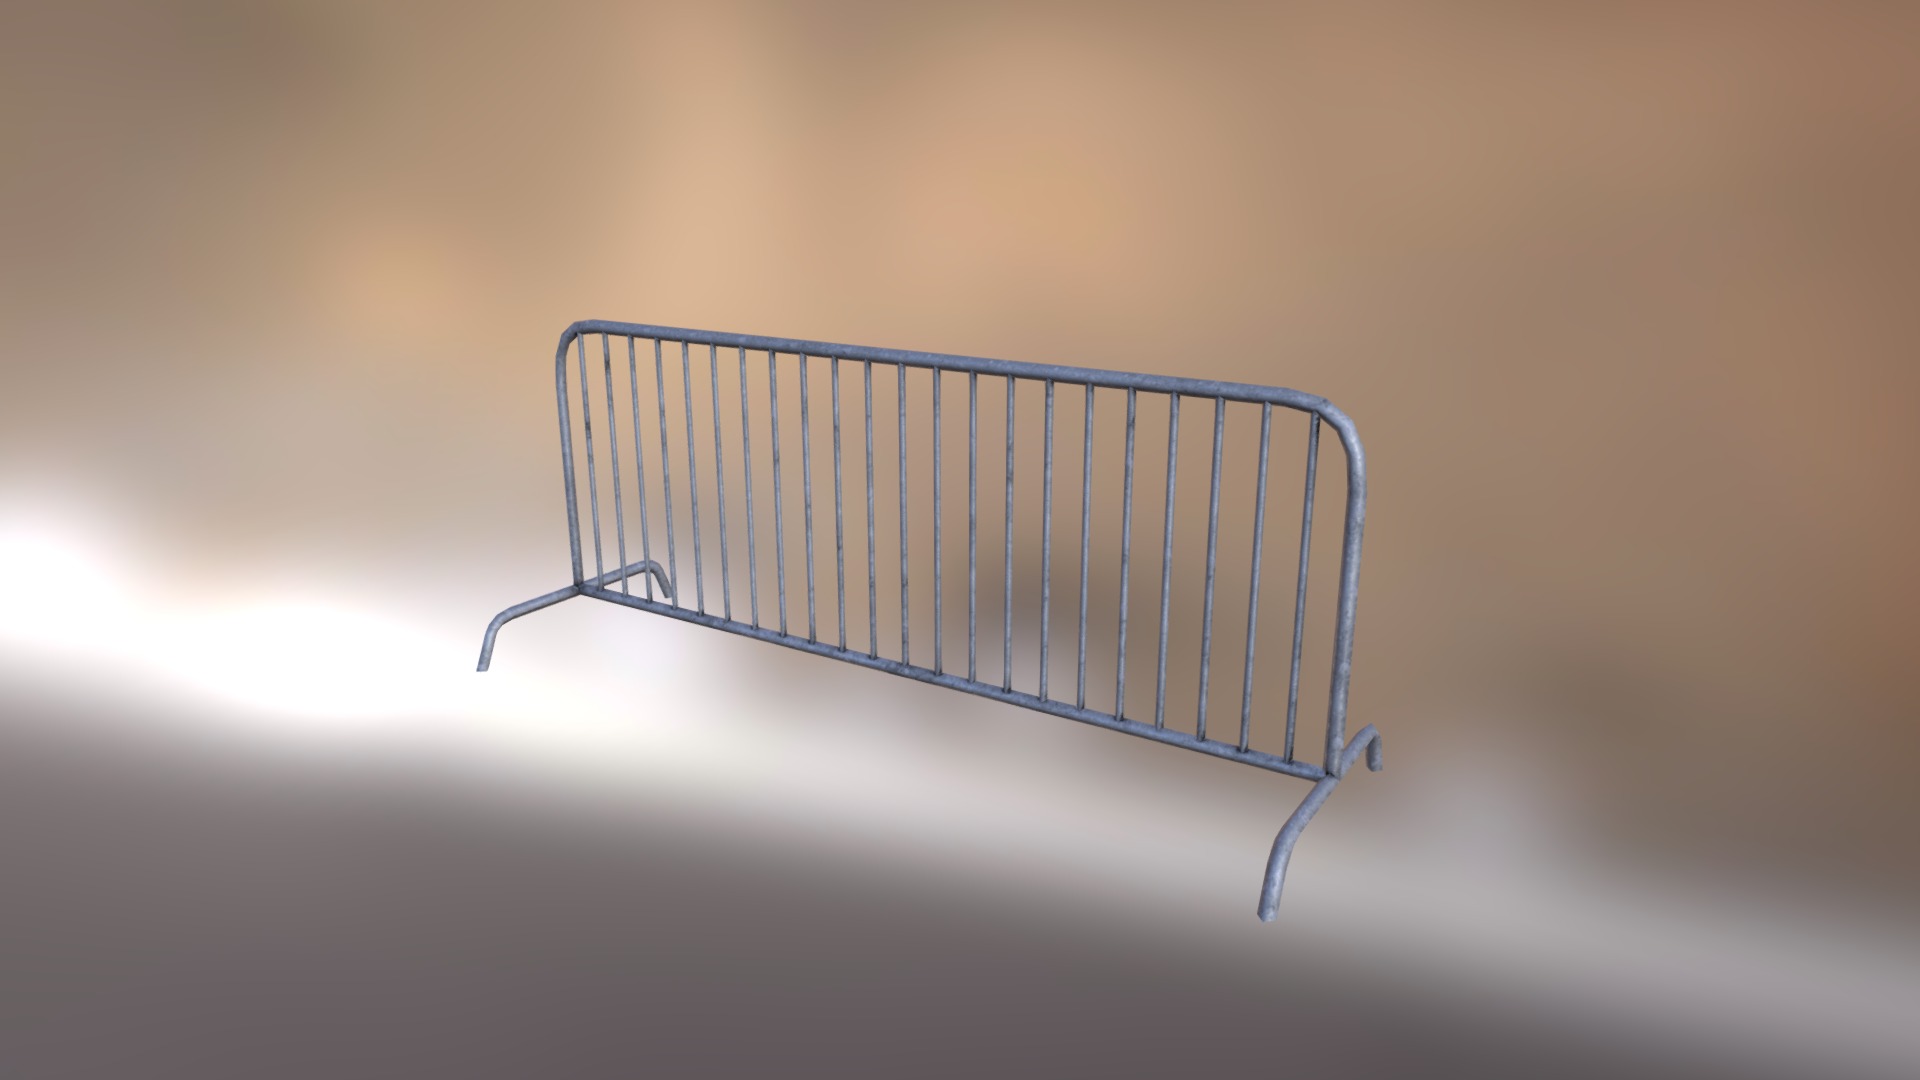 3D model Fence - This is a 3D model of the Fence. The 3D model is about a blue shopping cart.